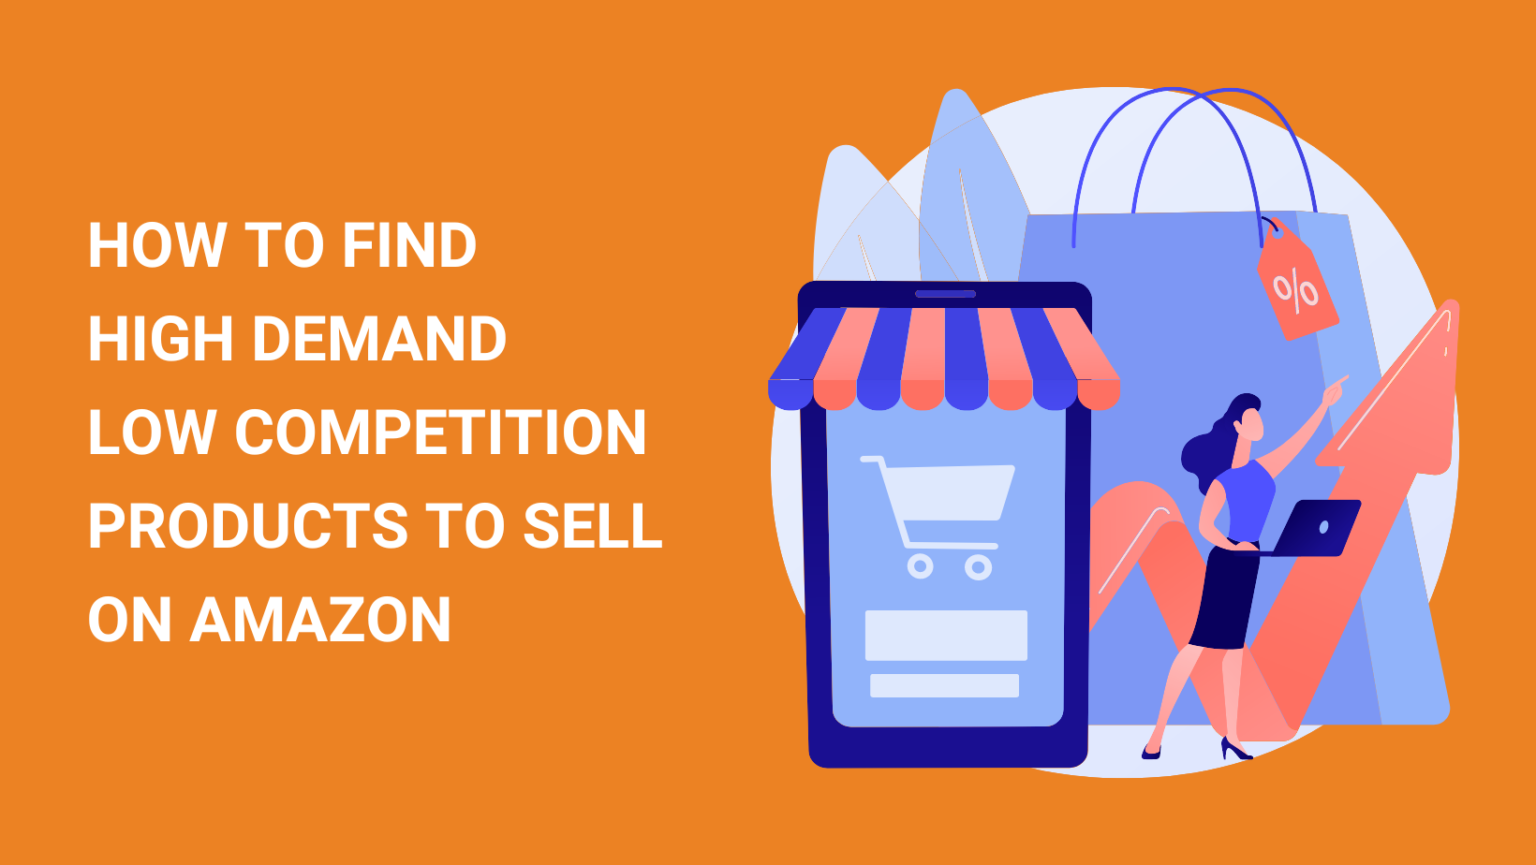 How to Find High Demand Low Competition Products to Sell on Amazon in 2022?